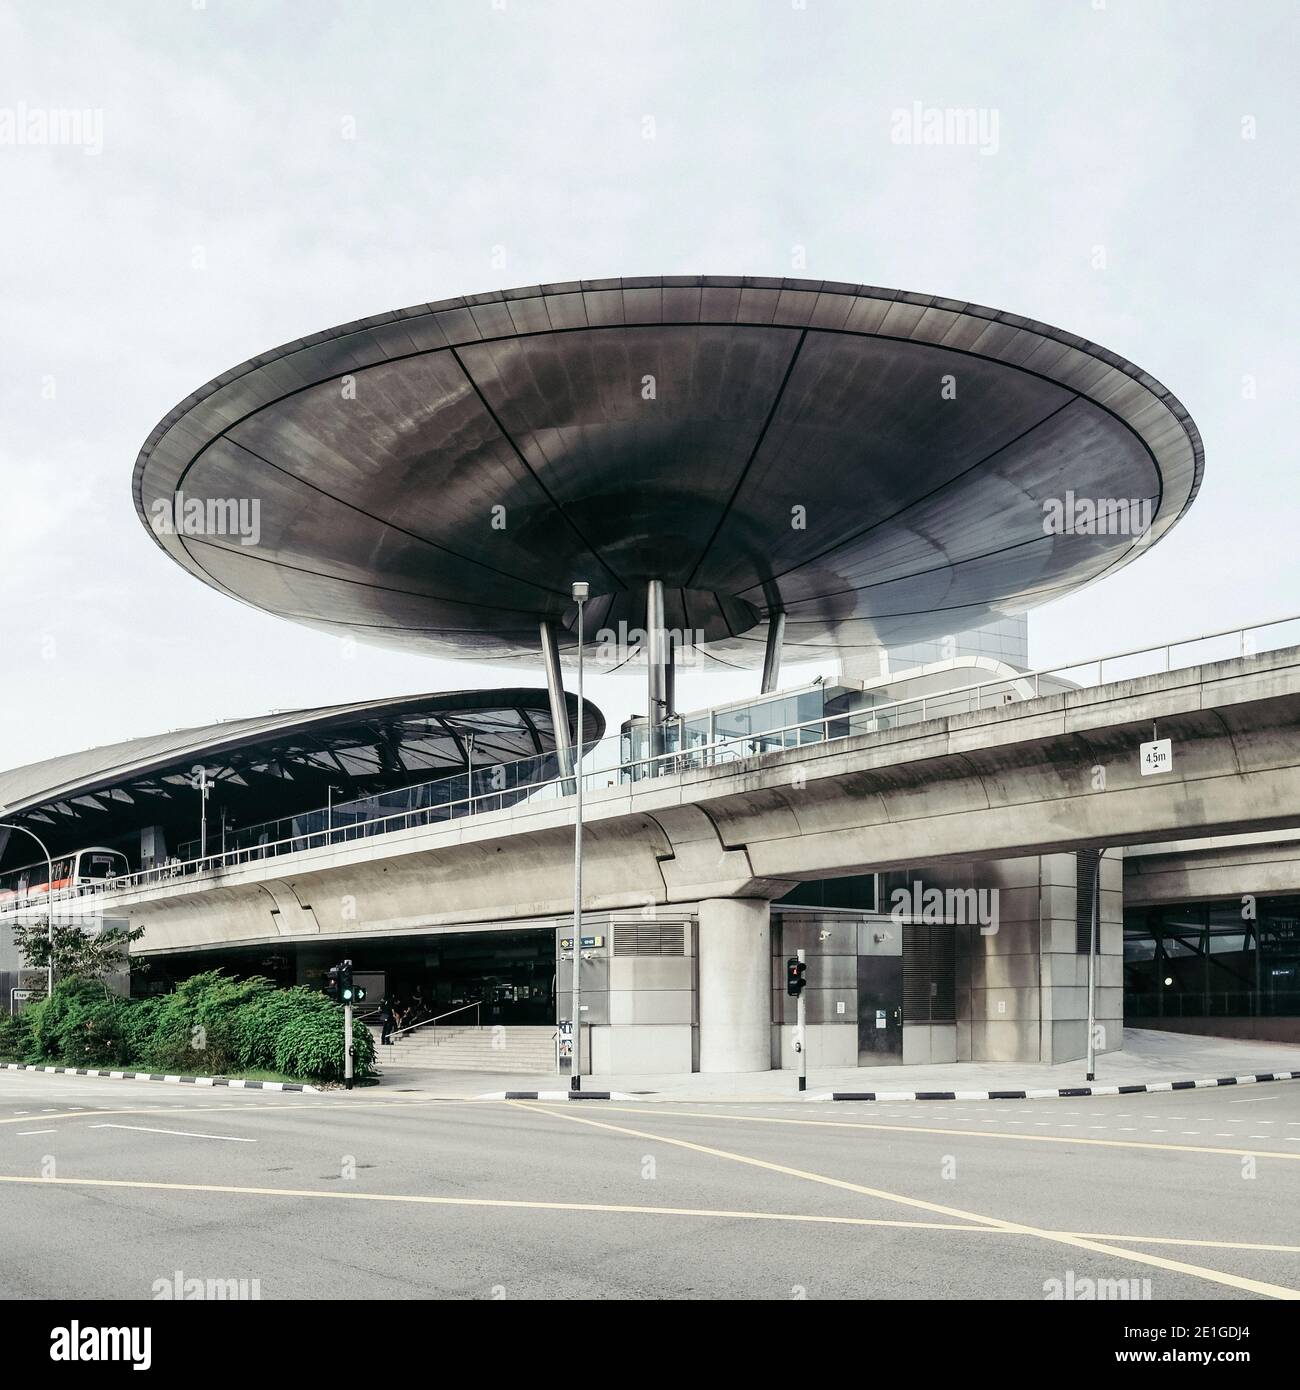 Expo MRT station, Singapore designed by Foster + Partners. A 40-metre-diameter disc, clad in stainless steel, shelters the ticket hall. Stock Photo